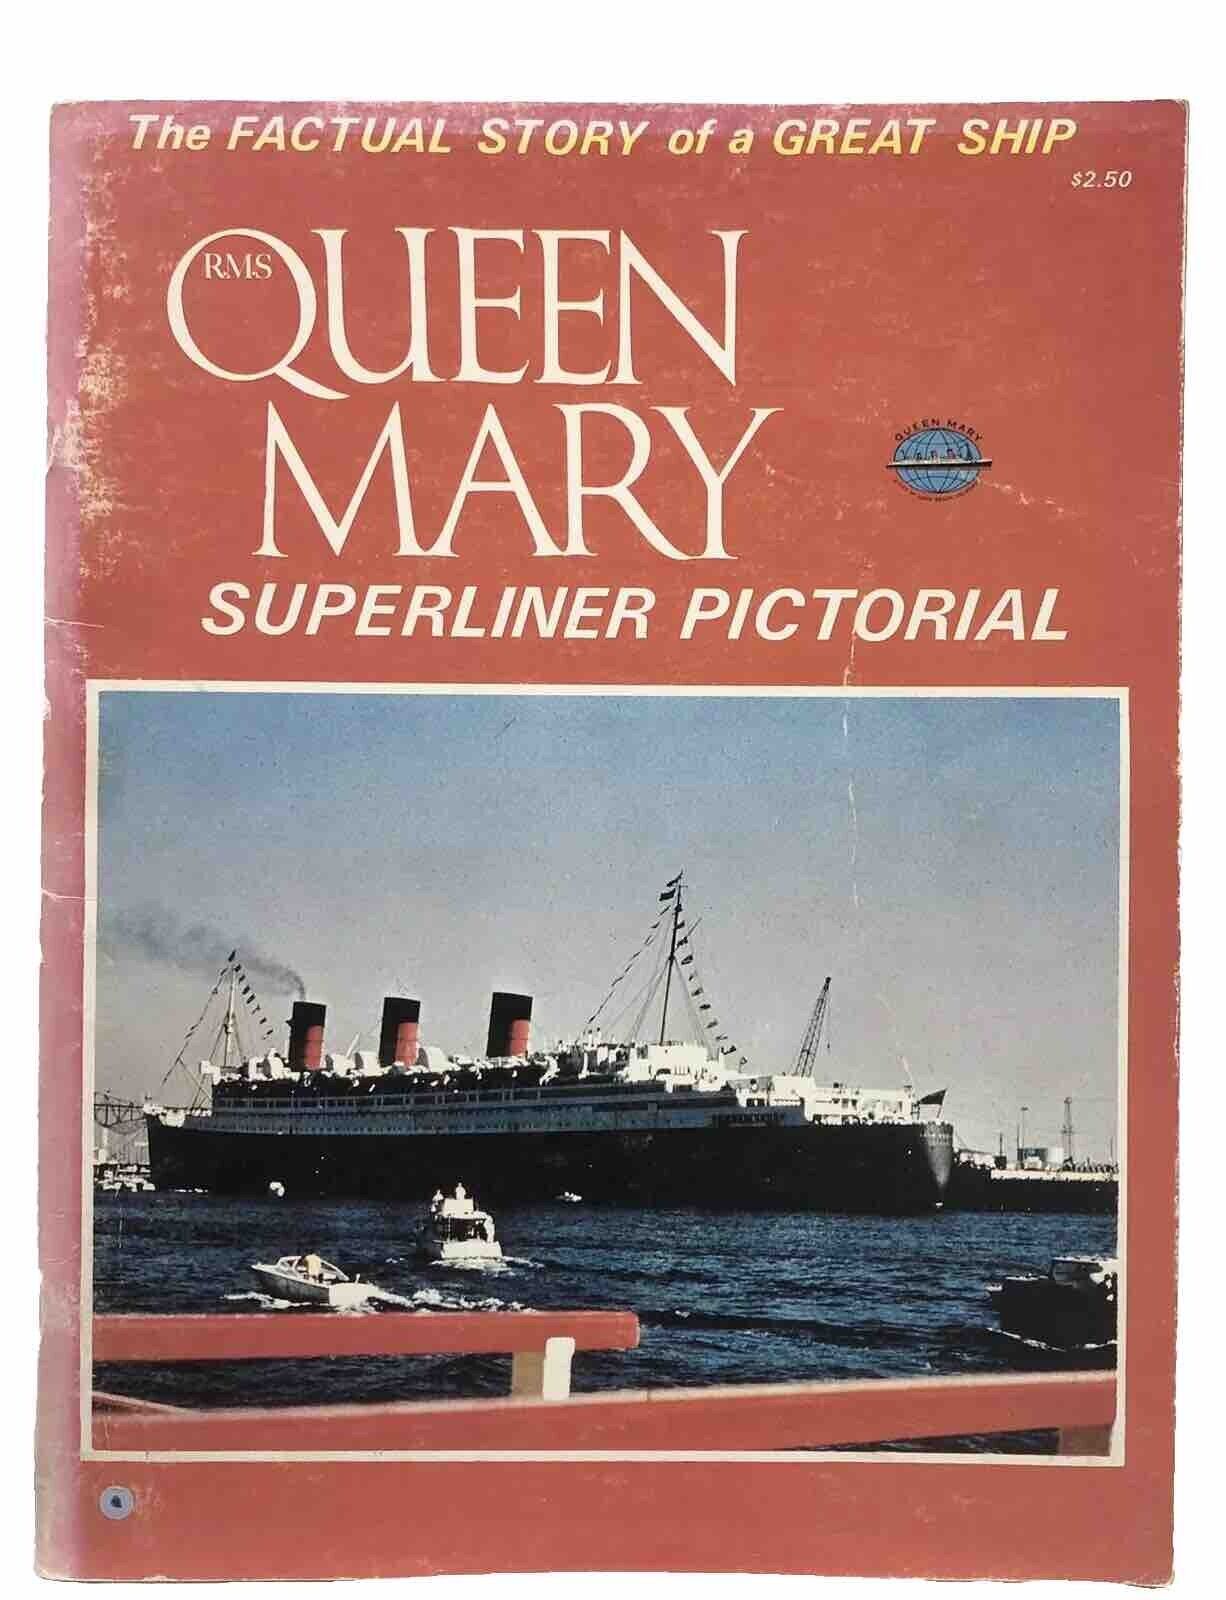 Queen Mary Superliner  1971  Pictorial The Factual Story of a Great Ship RMS